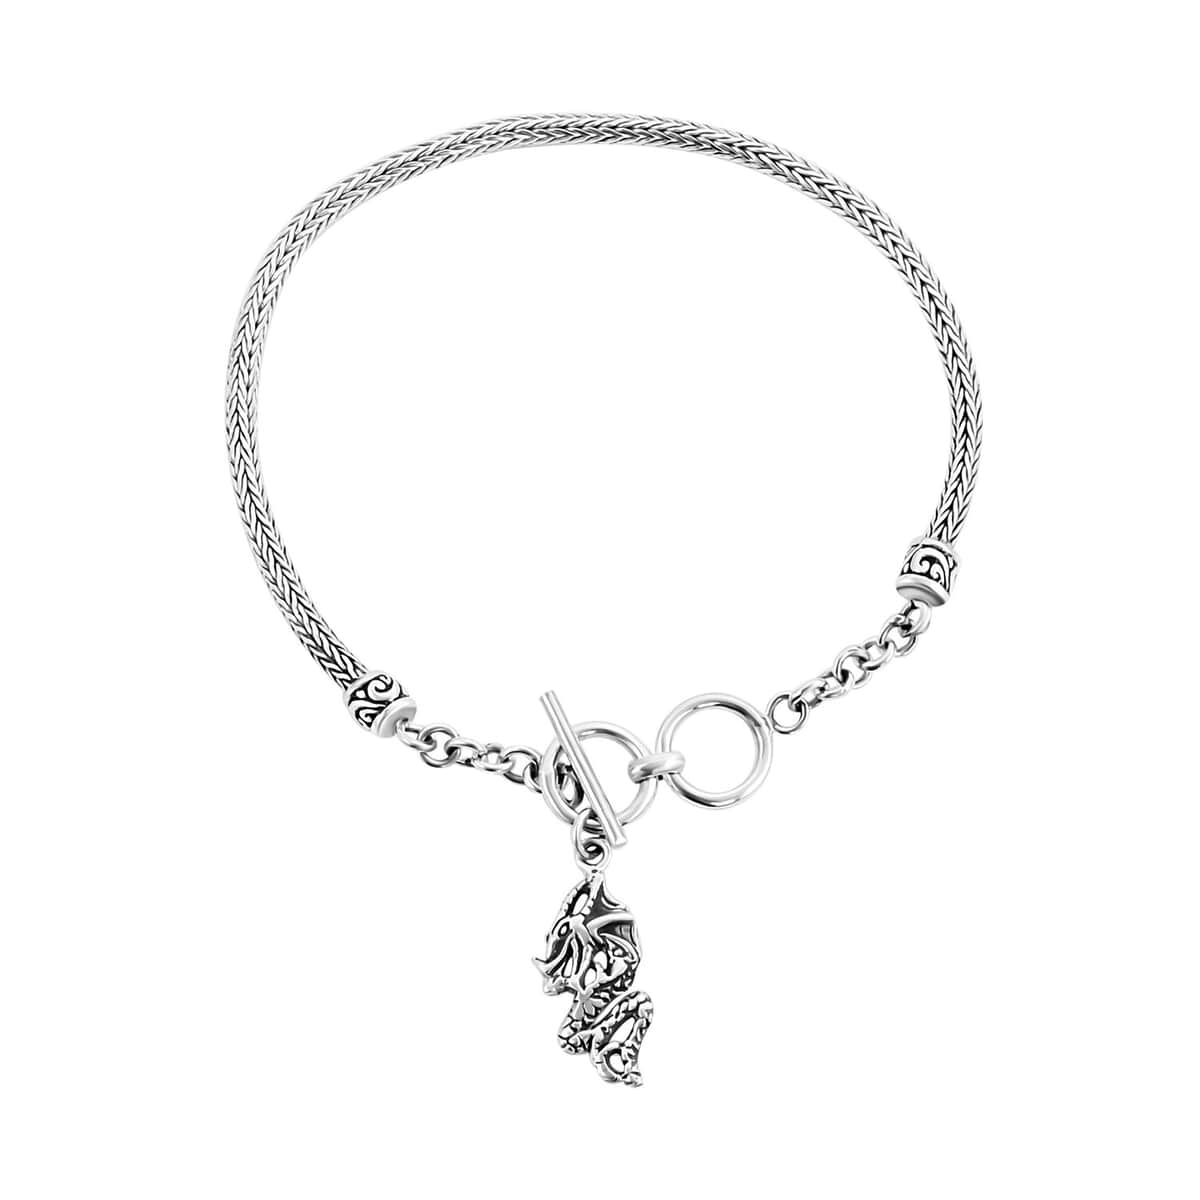 Mother’s Day Gift Bali Legacy Sterling Silver Tulang Naga Dragon Bracelet with Dragon Charm (6.50-8.0In) 8.20 Grams image number 0